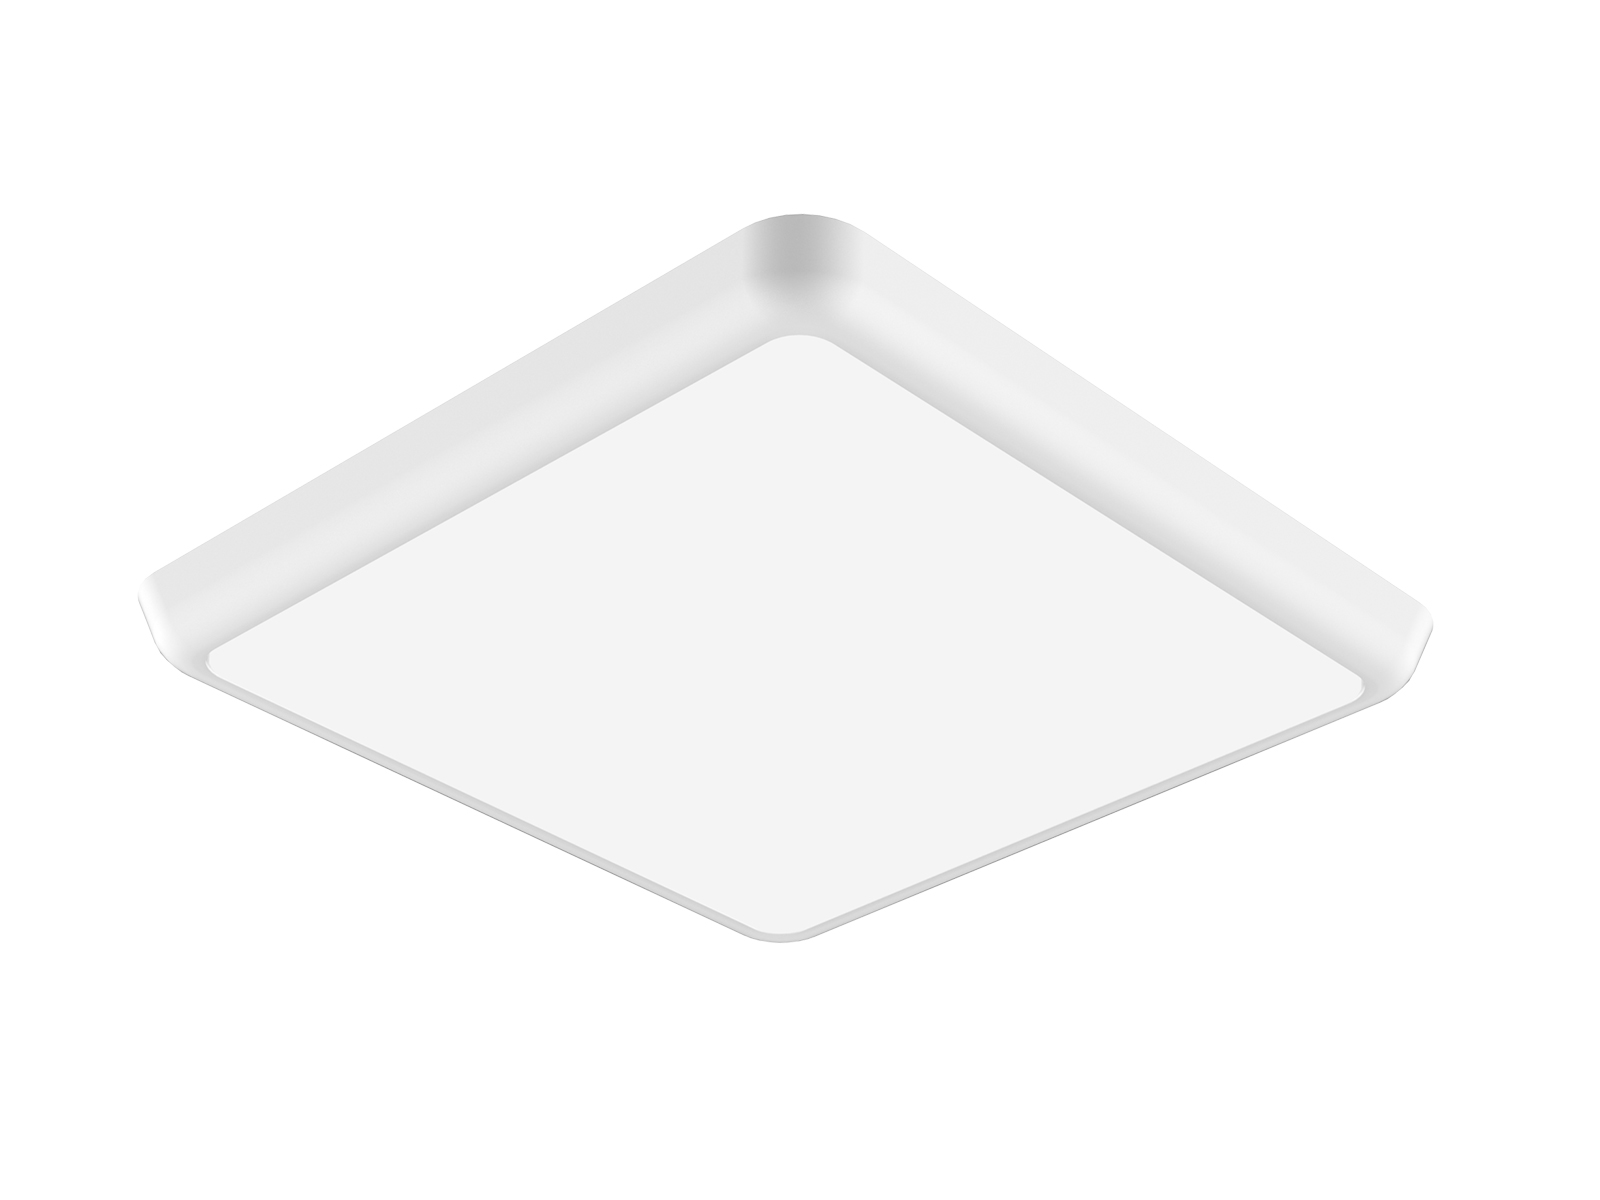 8 inch square kitchen ceiling light